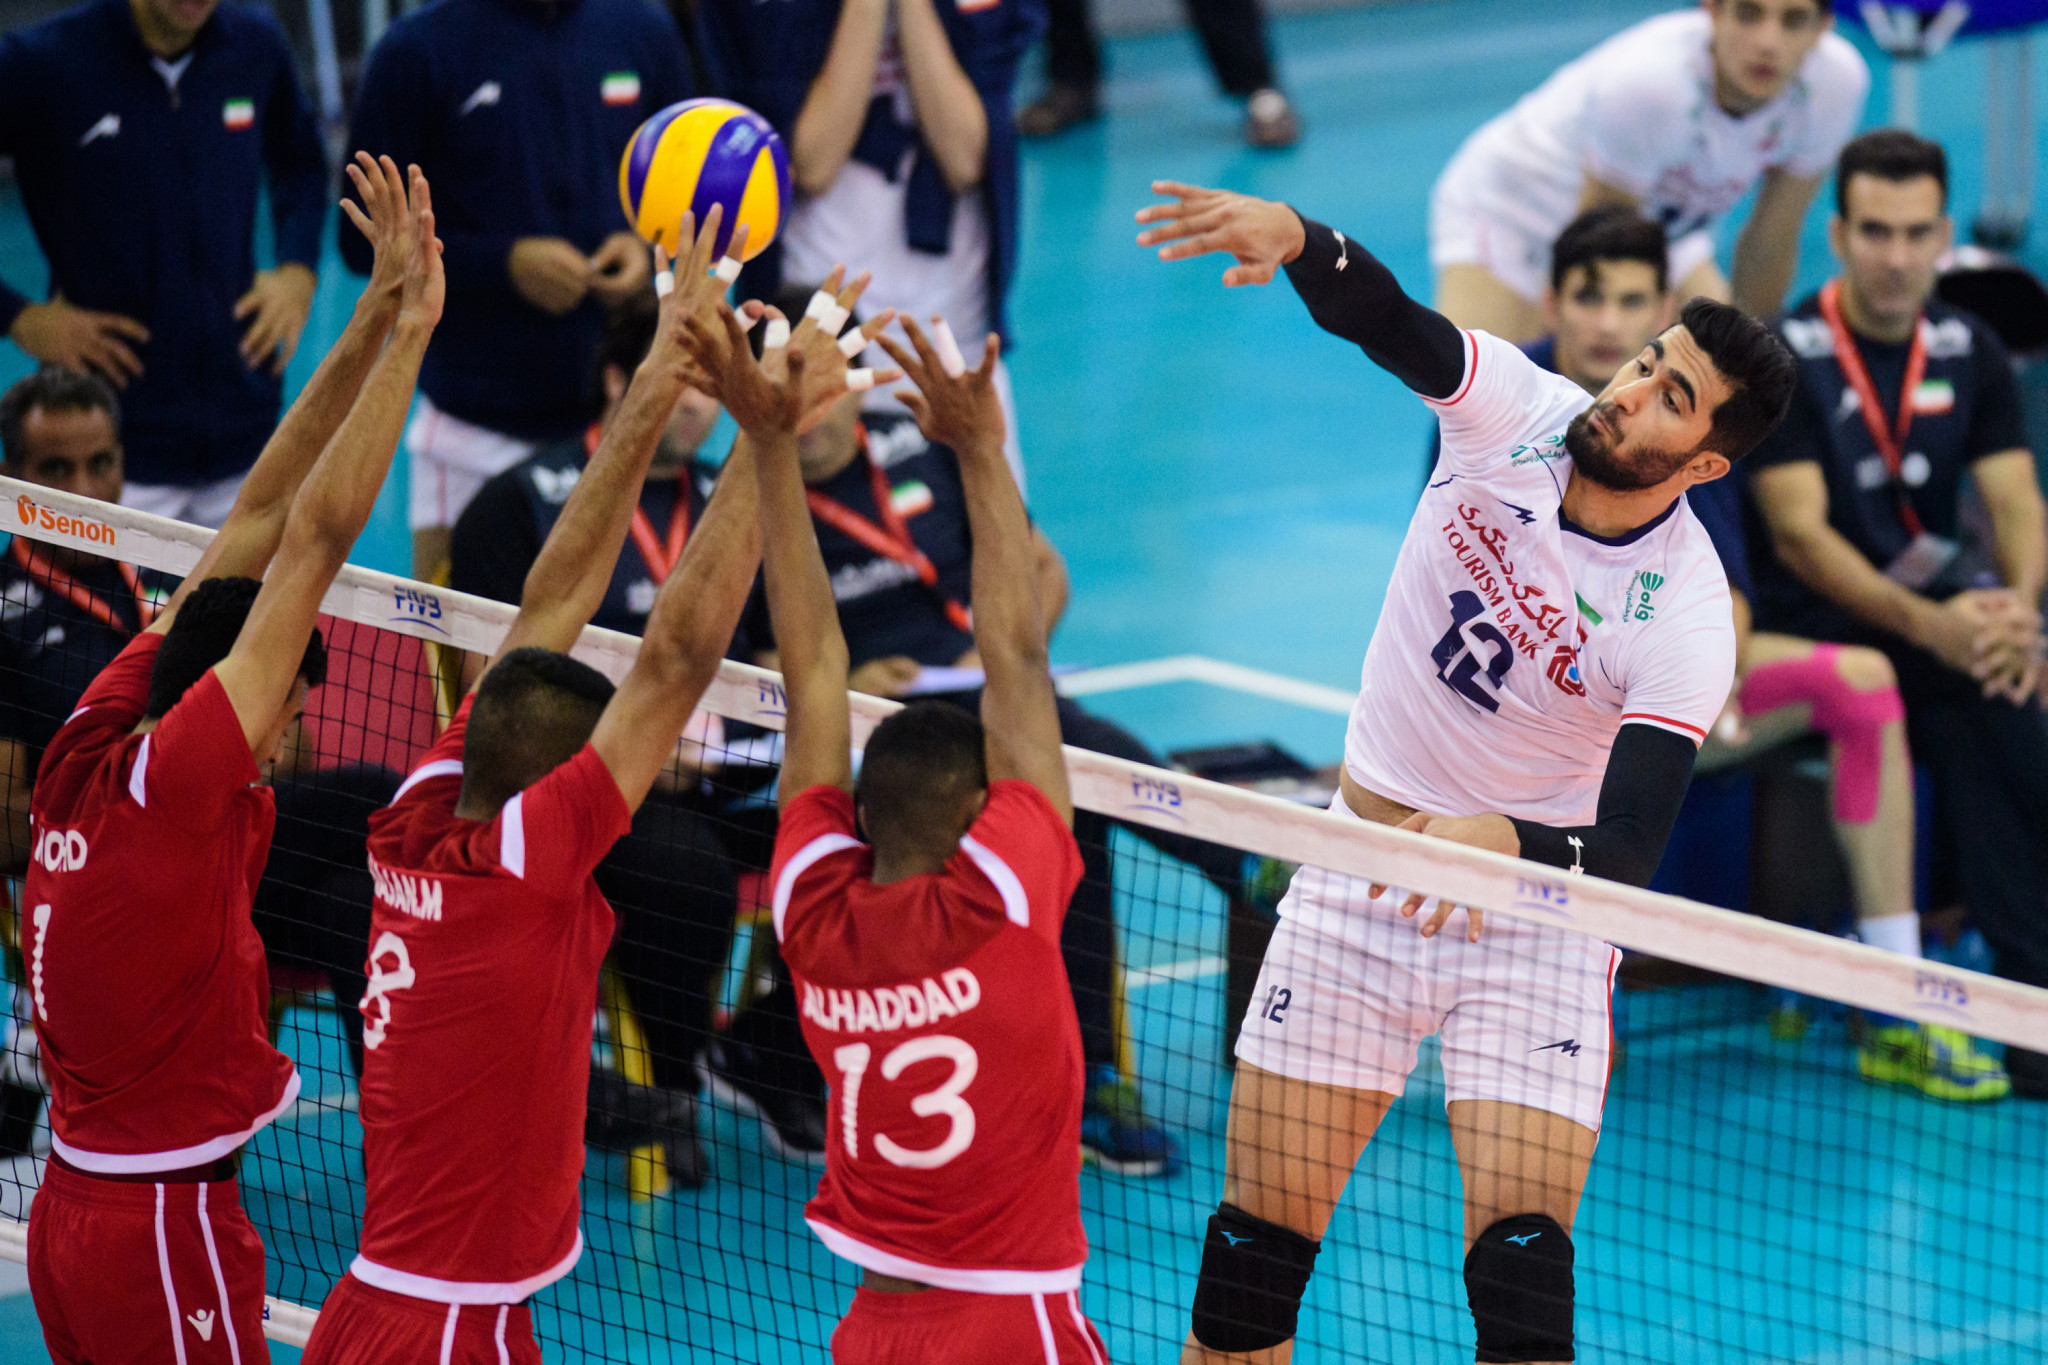  Iran beat Brazil in Bahrain to earn first final appearance in FIVB Men’s Under-21 World Championship